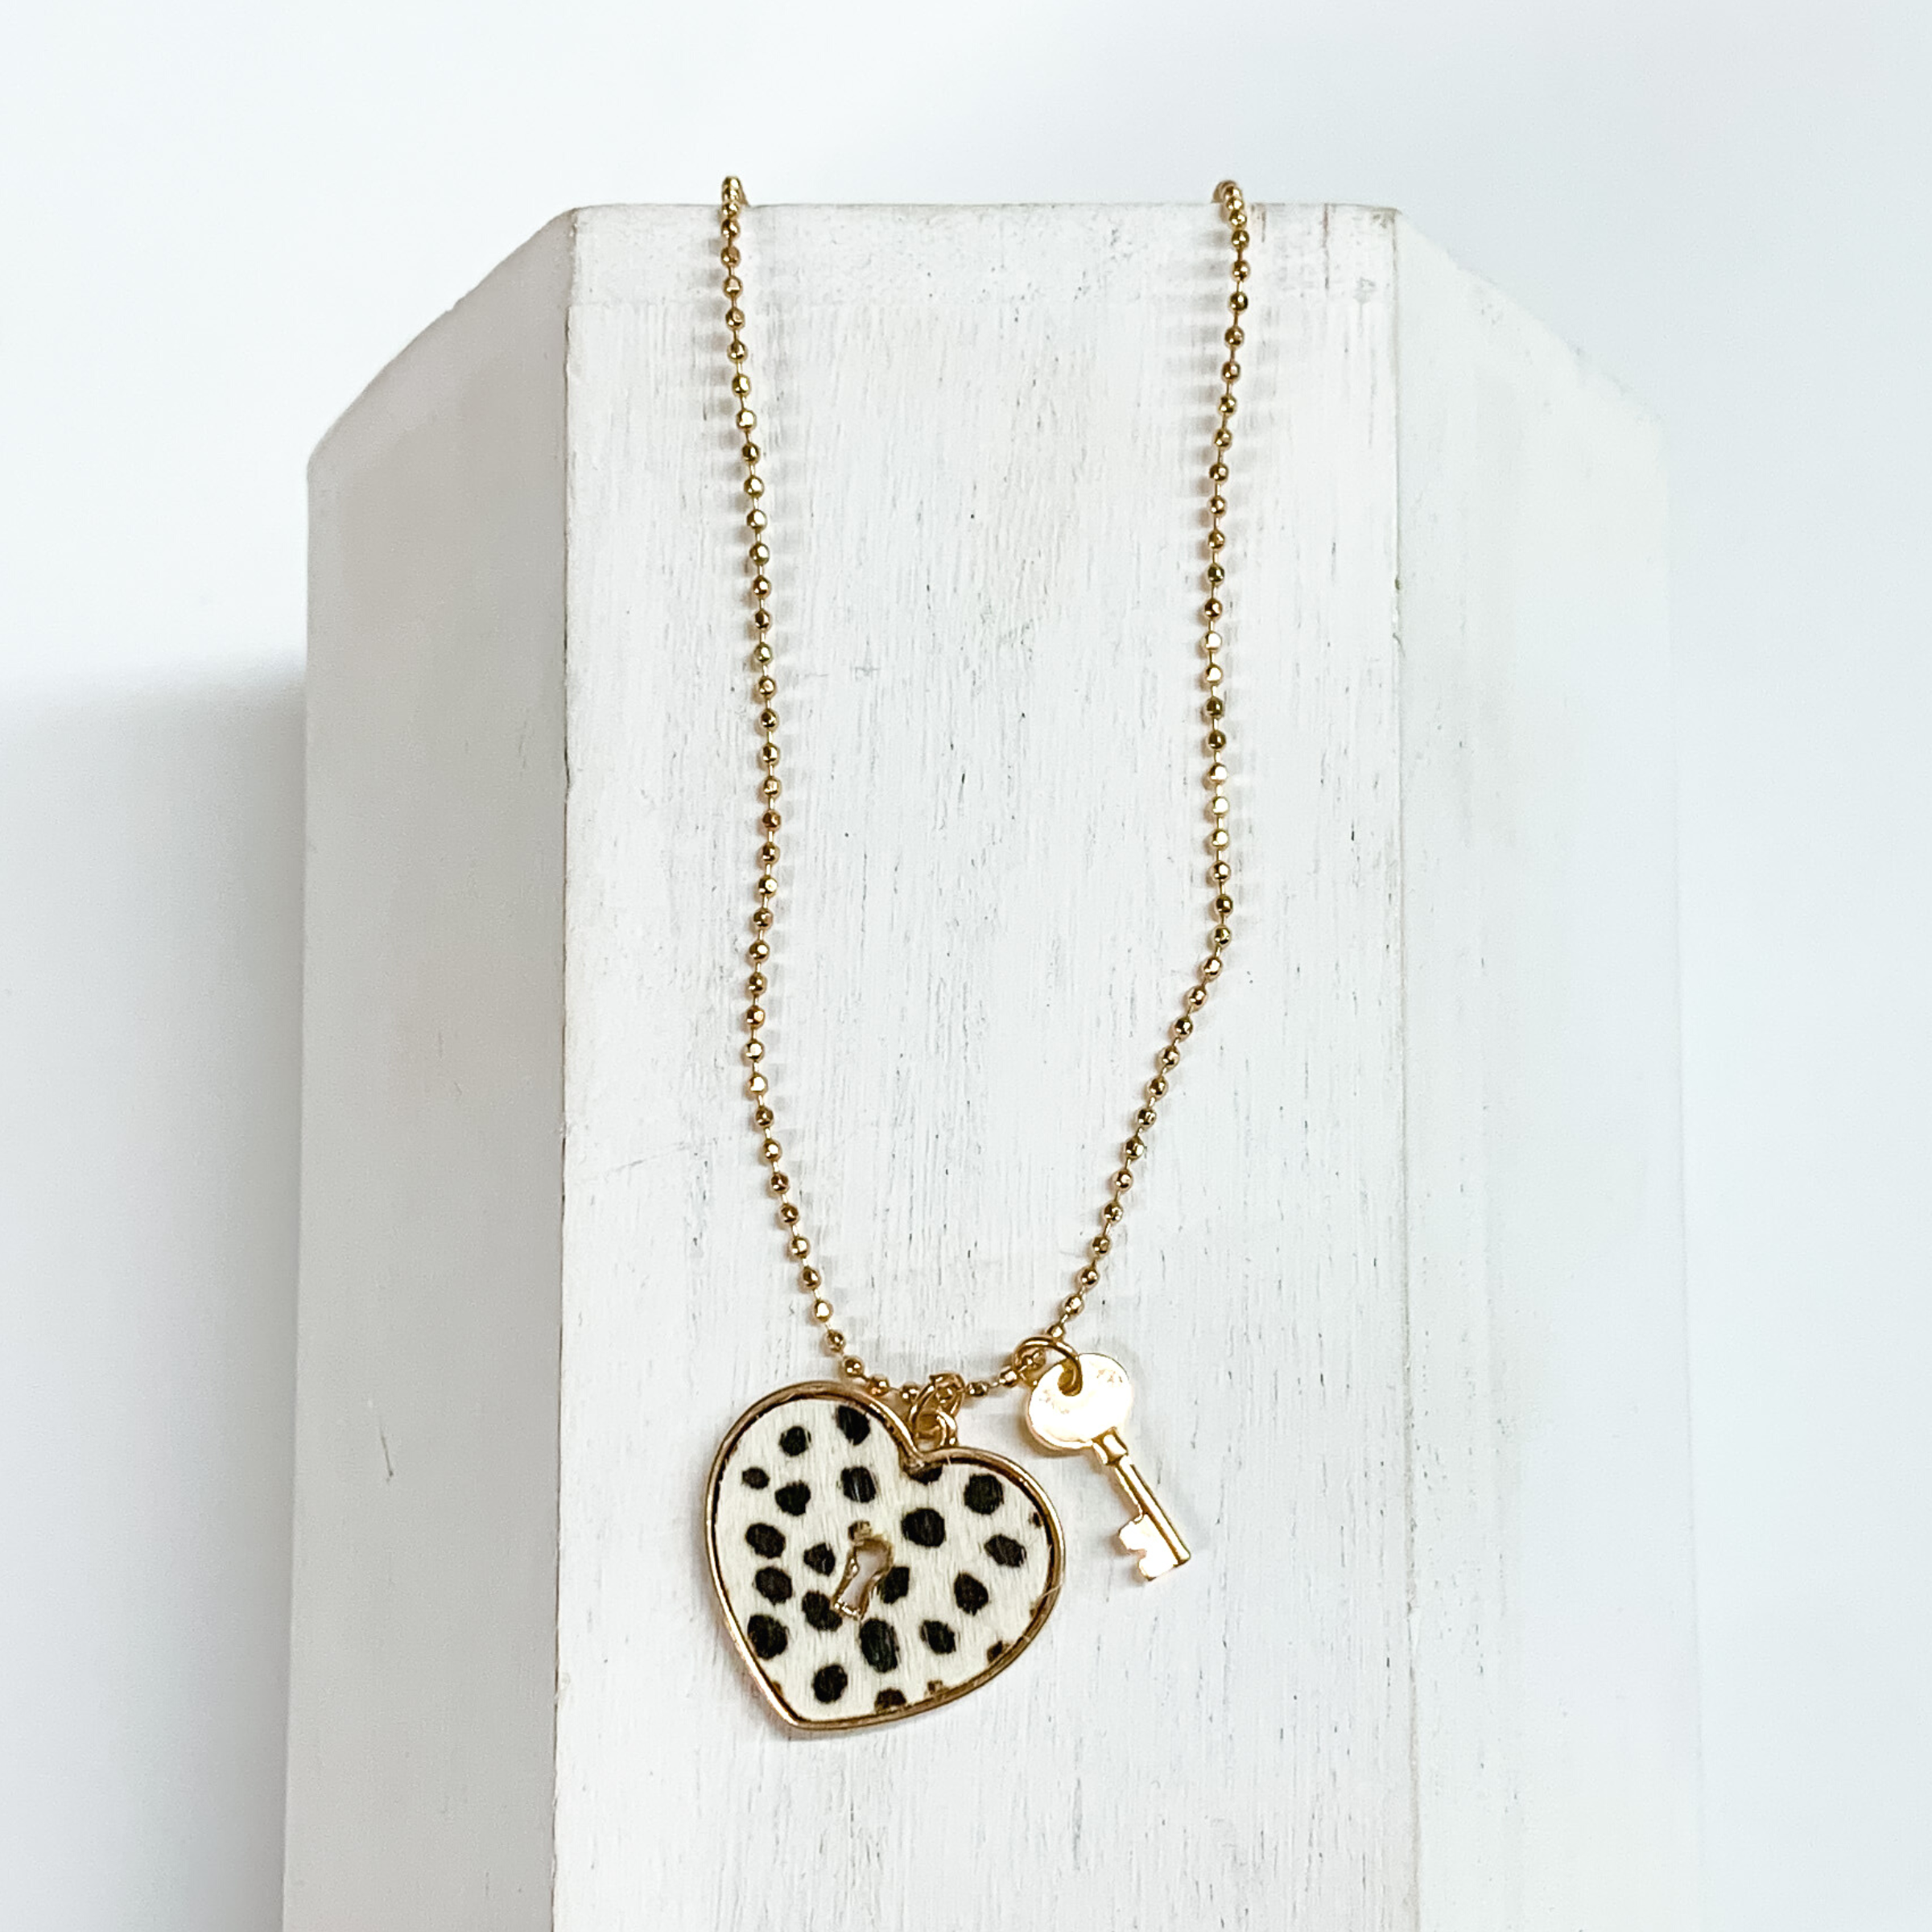 Gold, ball chain necklace with a white dotted heart pendant and gold key charm. This necklace is pictured on a white block on a white background.